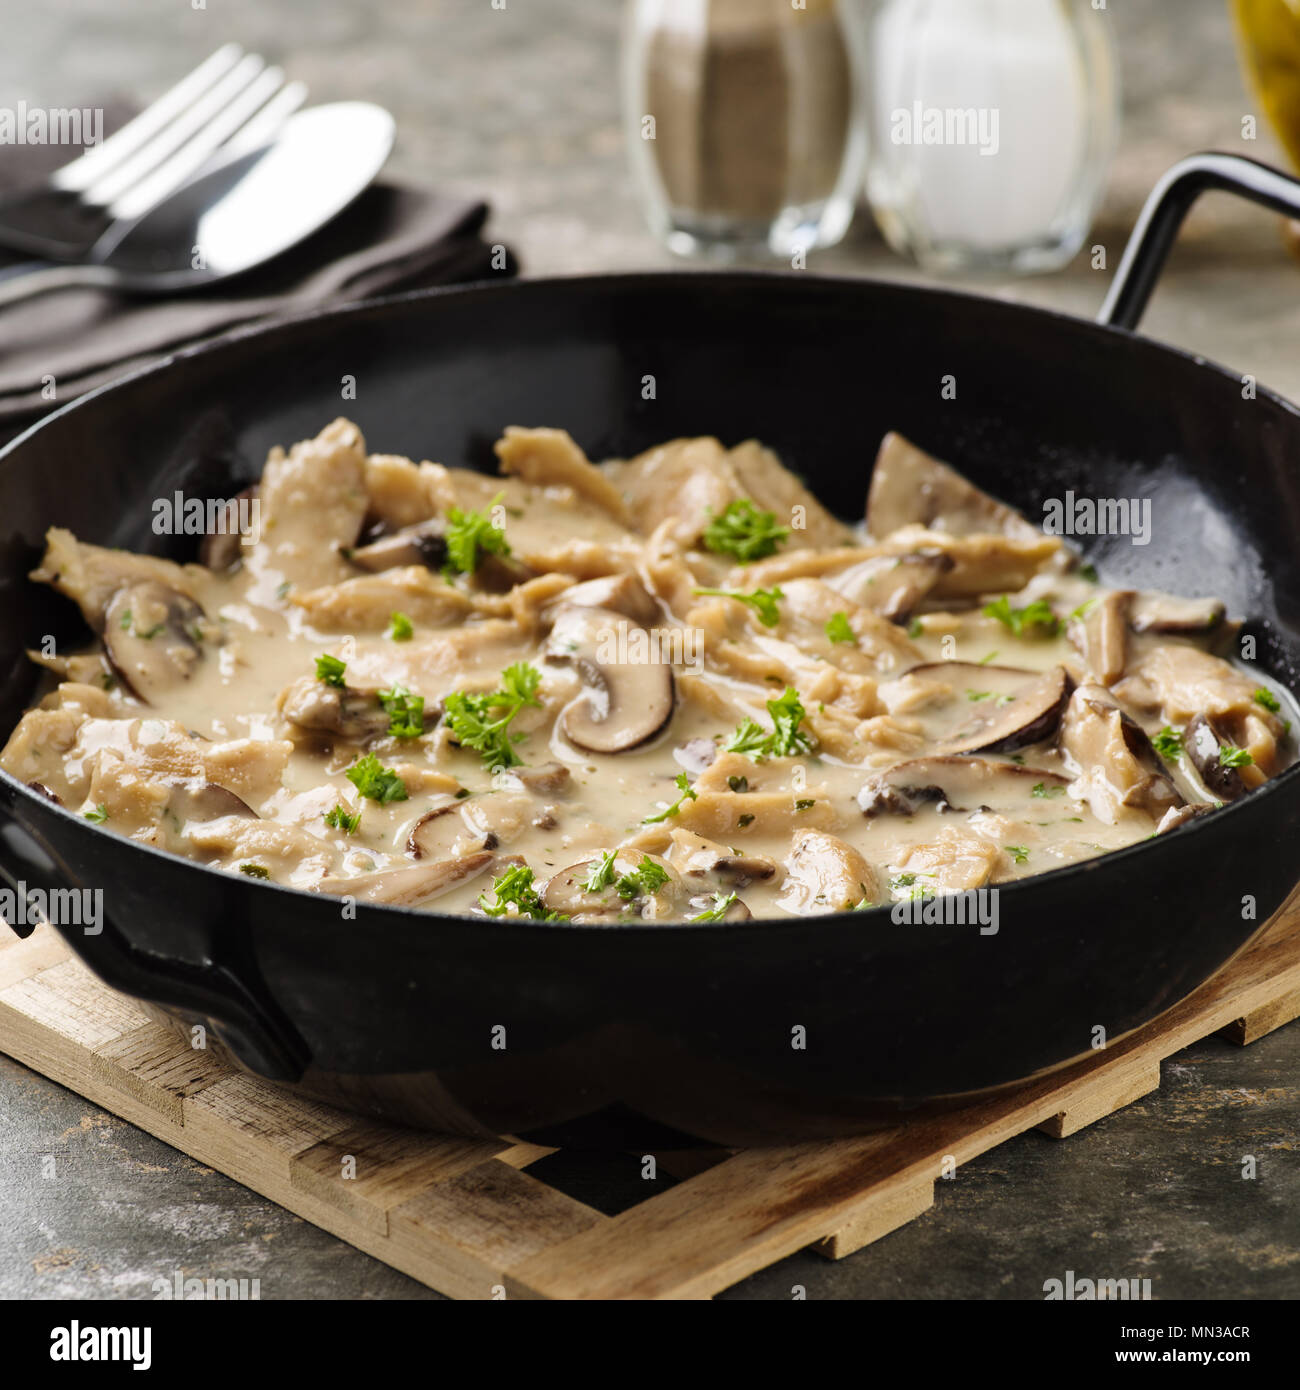 Vegan soy meat stripes and mushrooms in creamy sauce Stock Photo